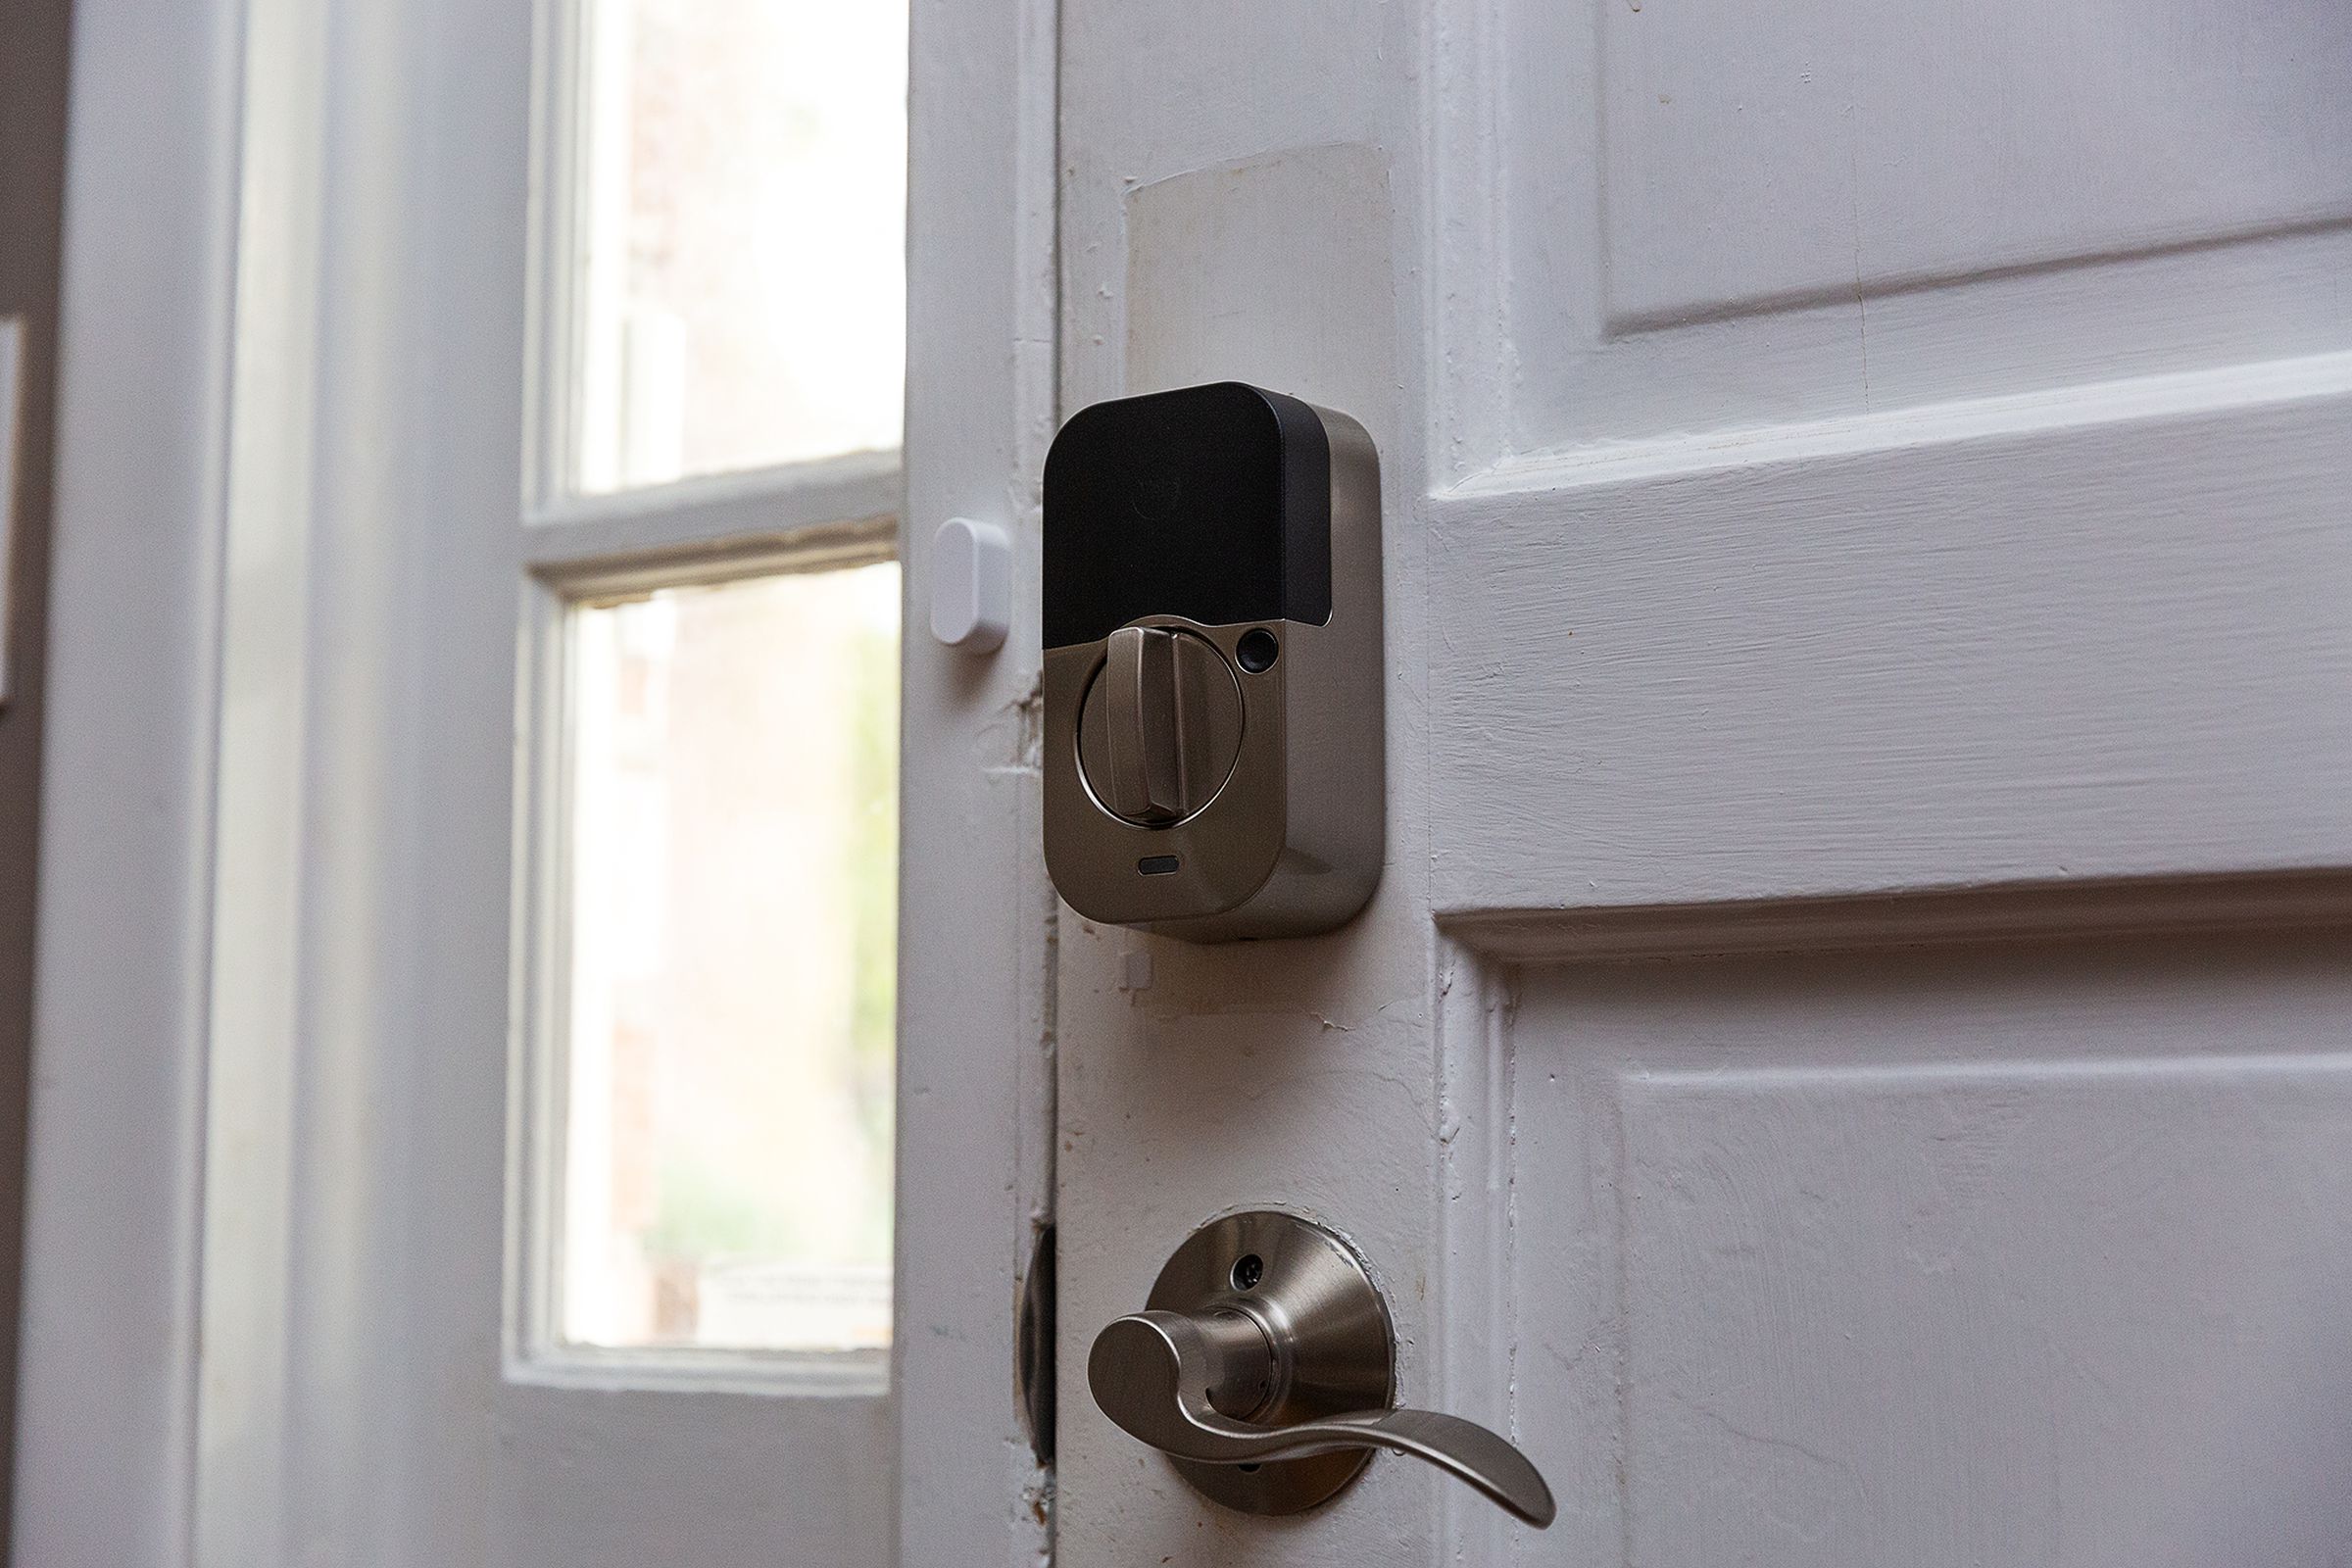 All the Assure 2 locks work with a DoorSense magnet that can tell you in the app if your door is open or closed.